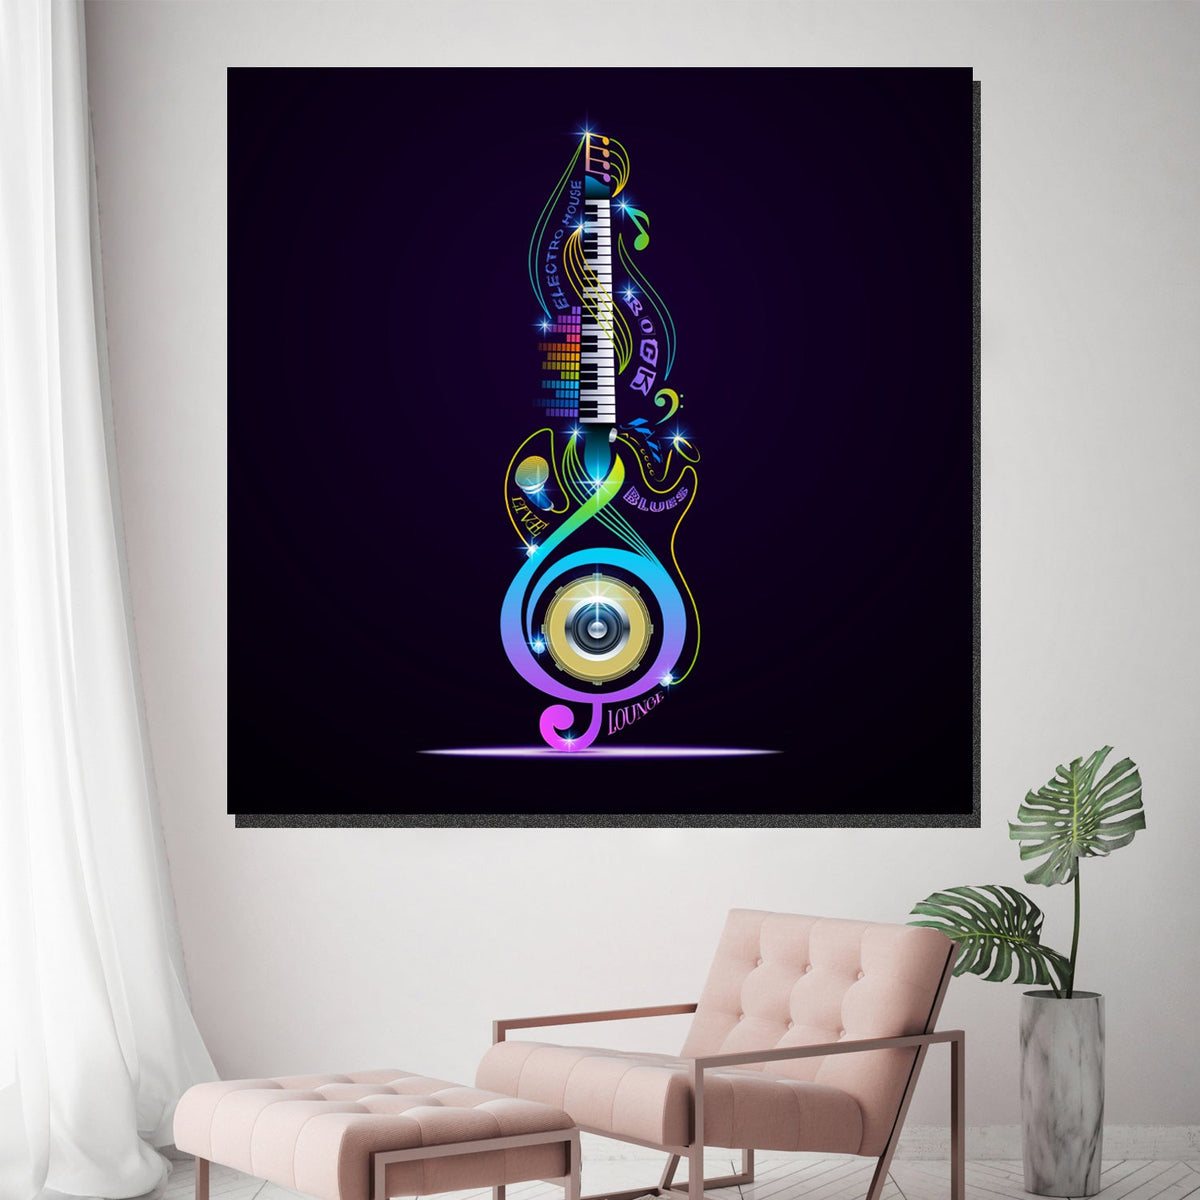 https://cdn.shopify.com/s/files/1/0387/9986/8044/products/MusicalCollageCanvasArtprintStretched-4.jpg